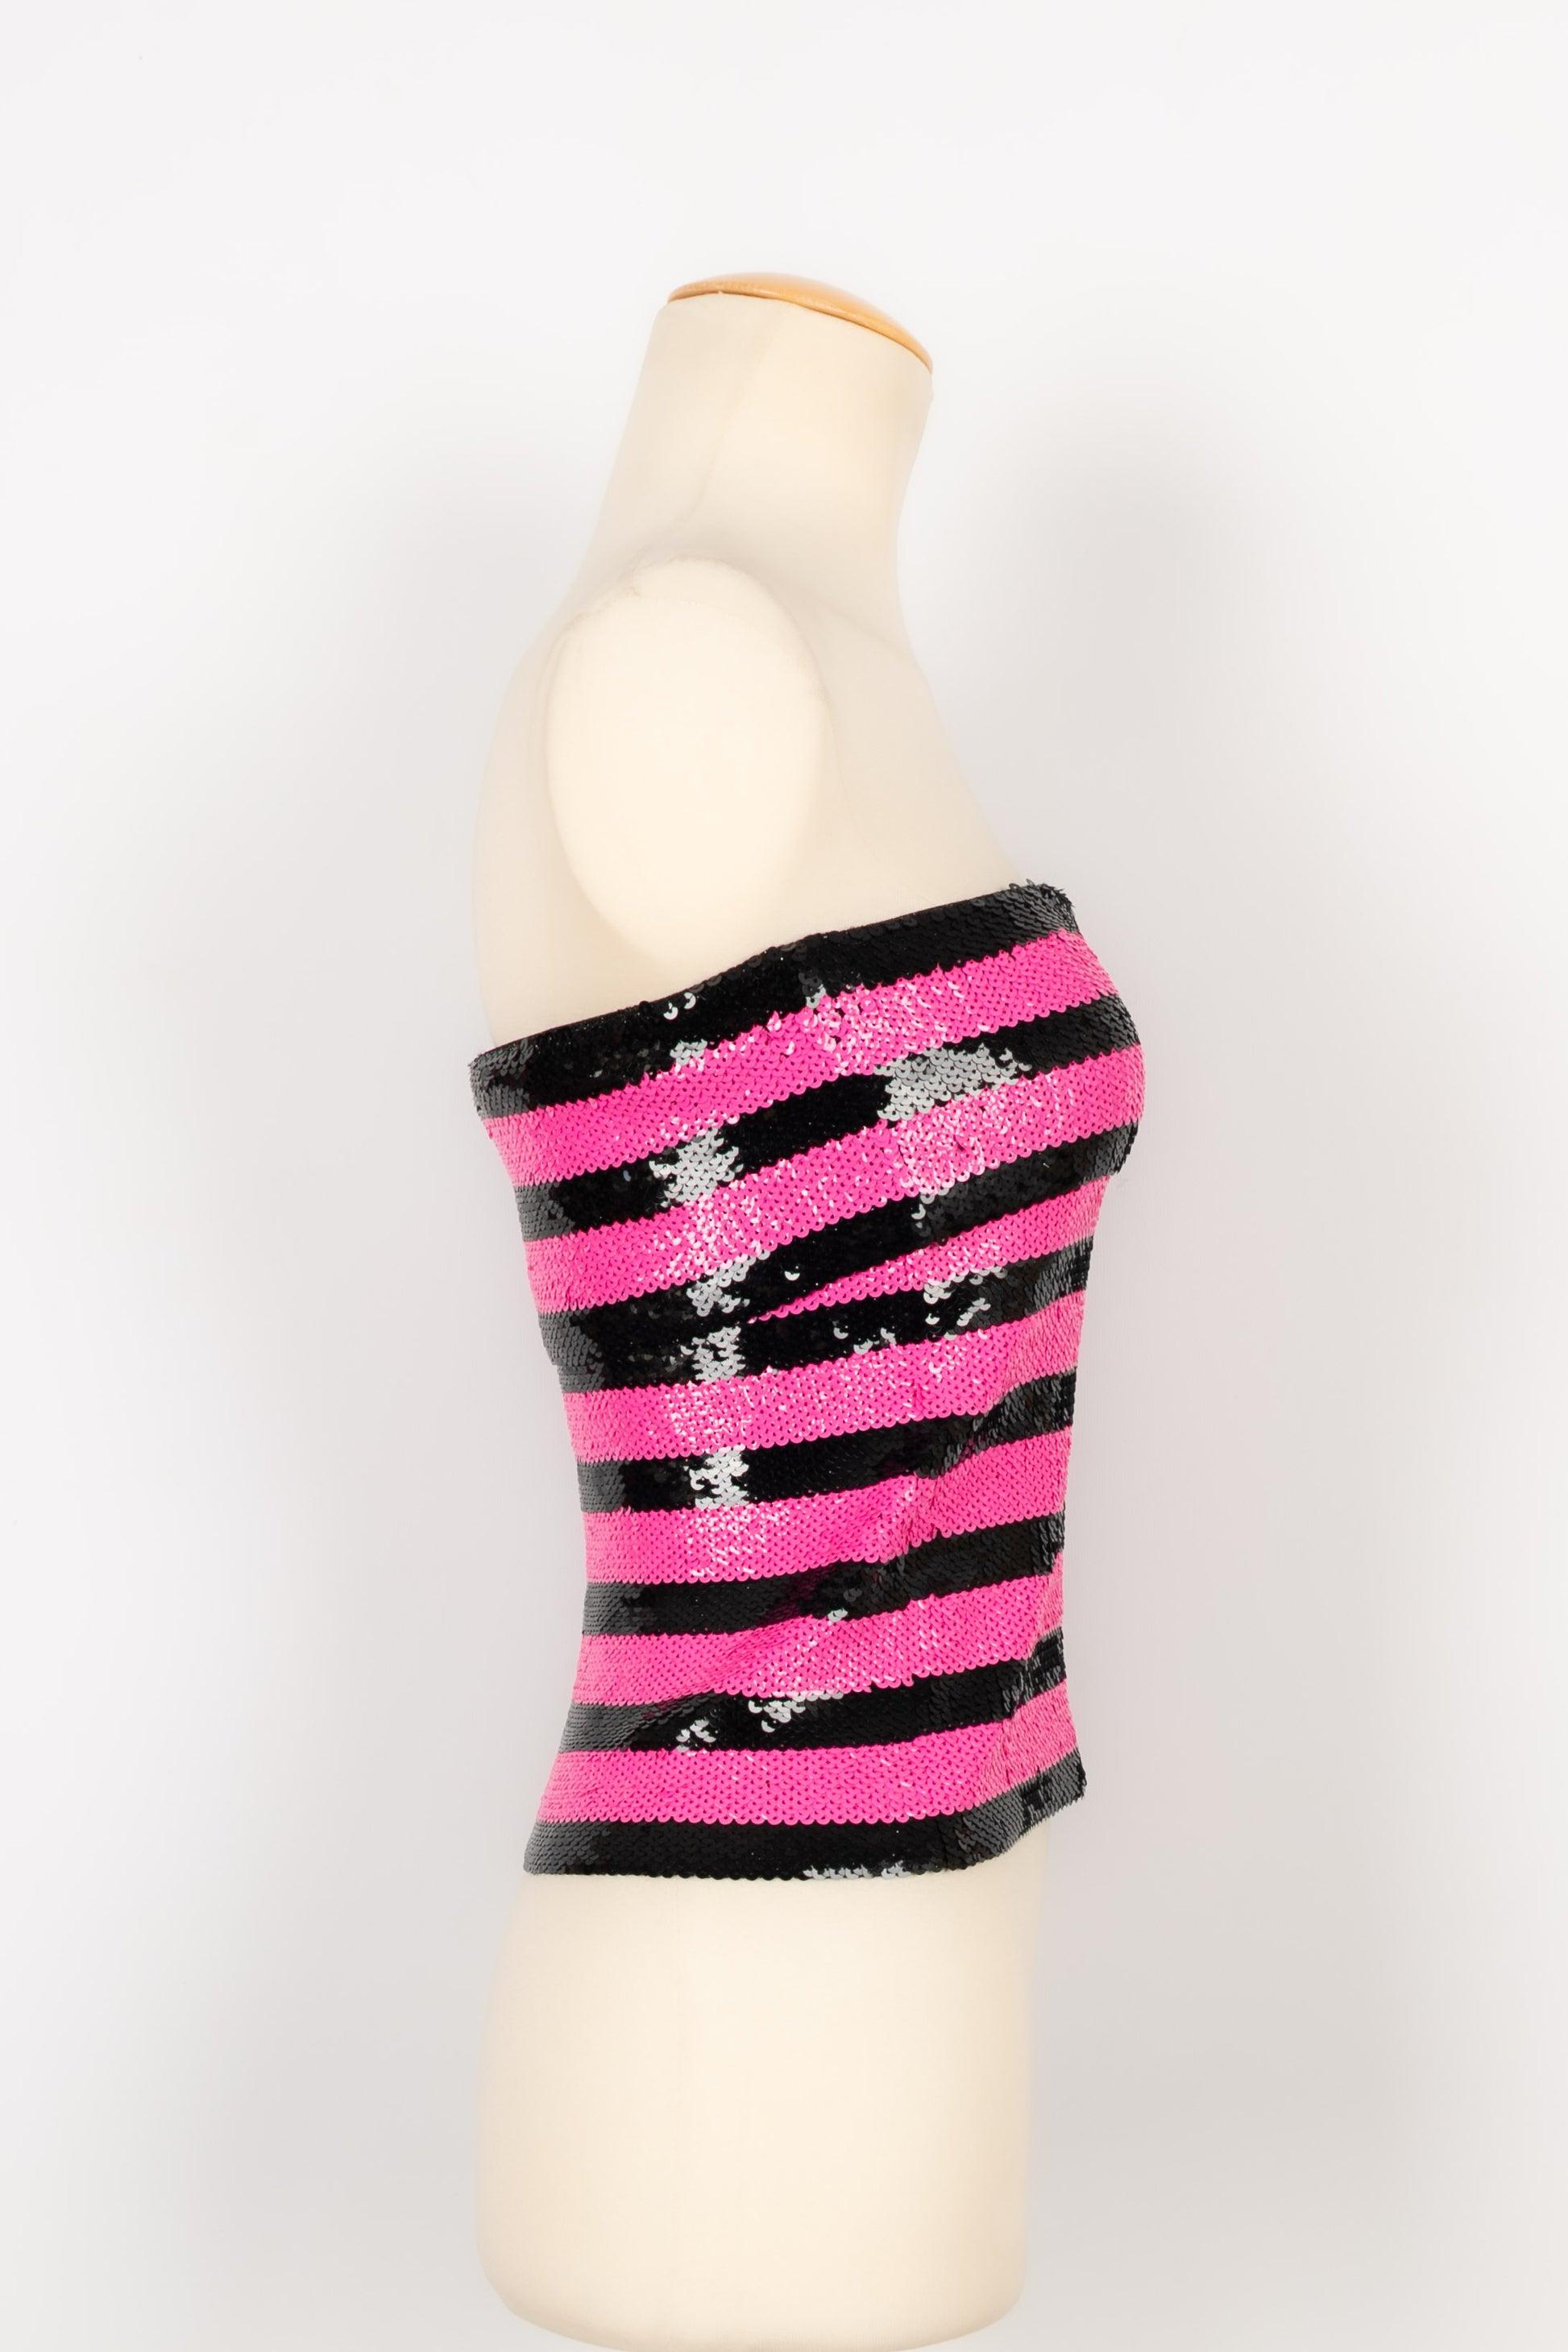 Yves Saint Laurent Black and Pink Sequinned Bustier Top, 2013 In Excellent Condition For Sale In SAINT-OUEN-SUR-SEINE, FR